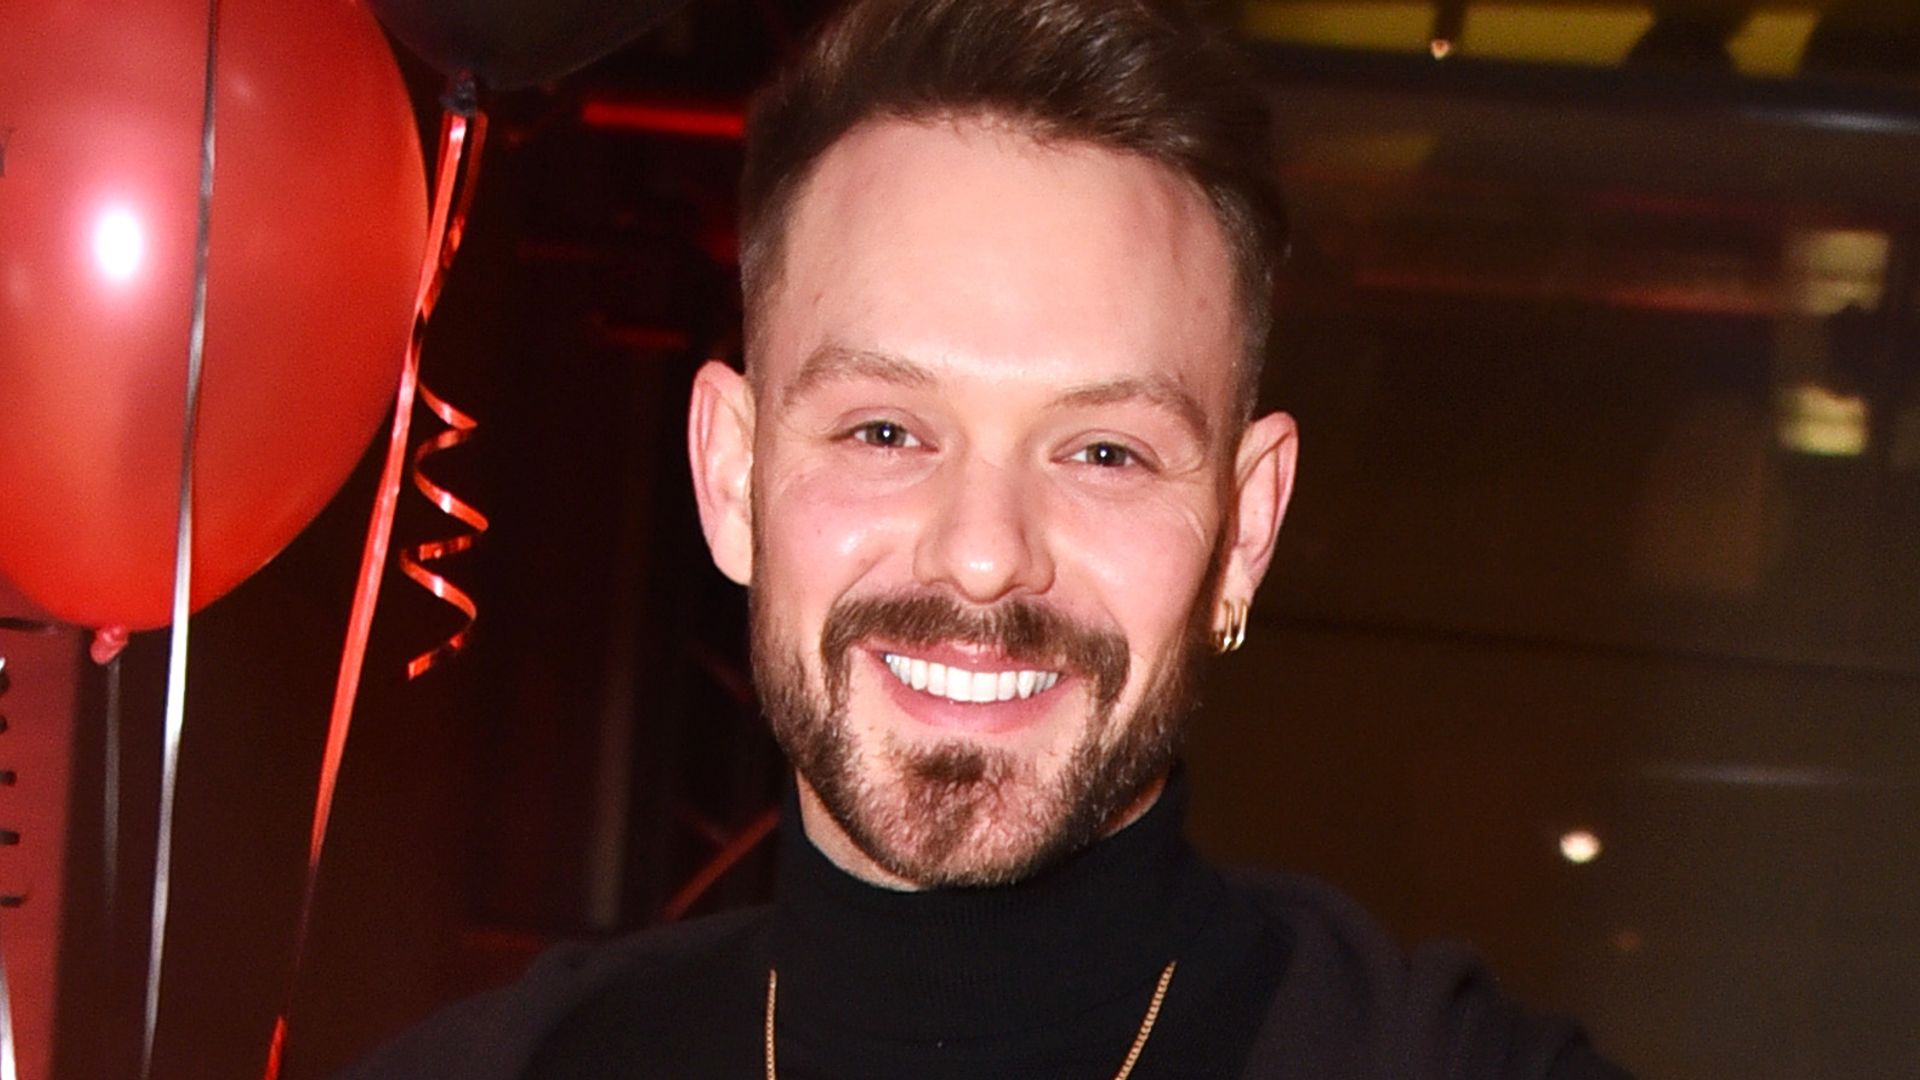 John Whaite in a black outfit in front of red balloons